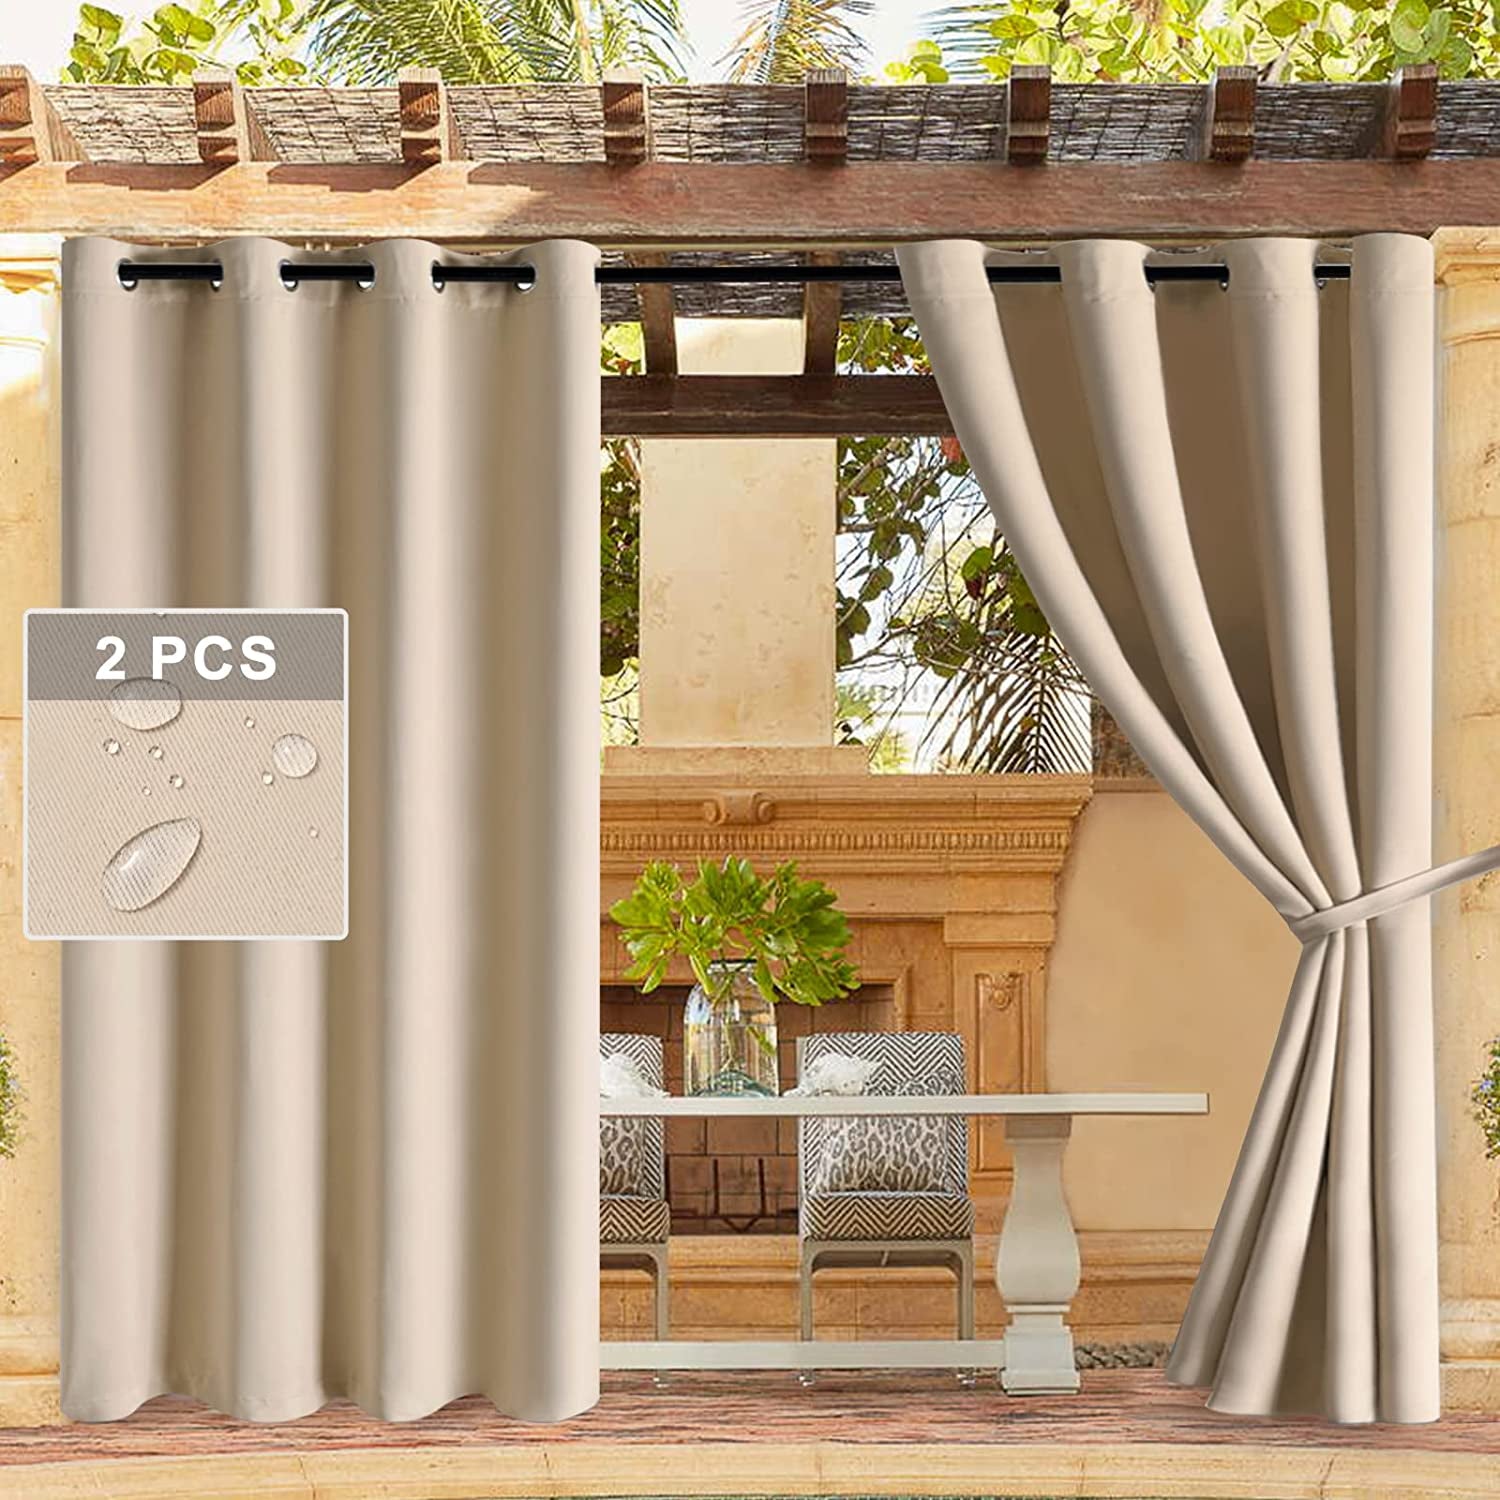 DWCN, DWCN Waterproof Outdoor Curtains for Patio -Indoor Outdoor Thermal Insulated, Sun Blocking Grommet Blackout Curtains for Bedroom, Pergola, Porch and Cabana, Beige, 52 X 95 Inches Long, 2 Panels